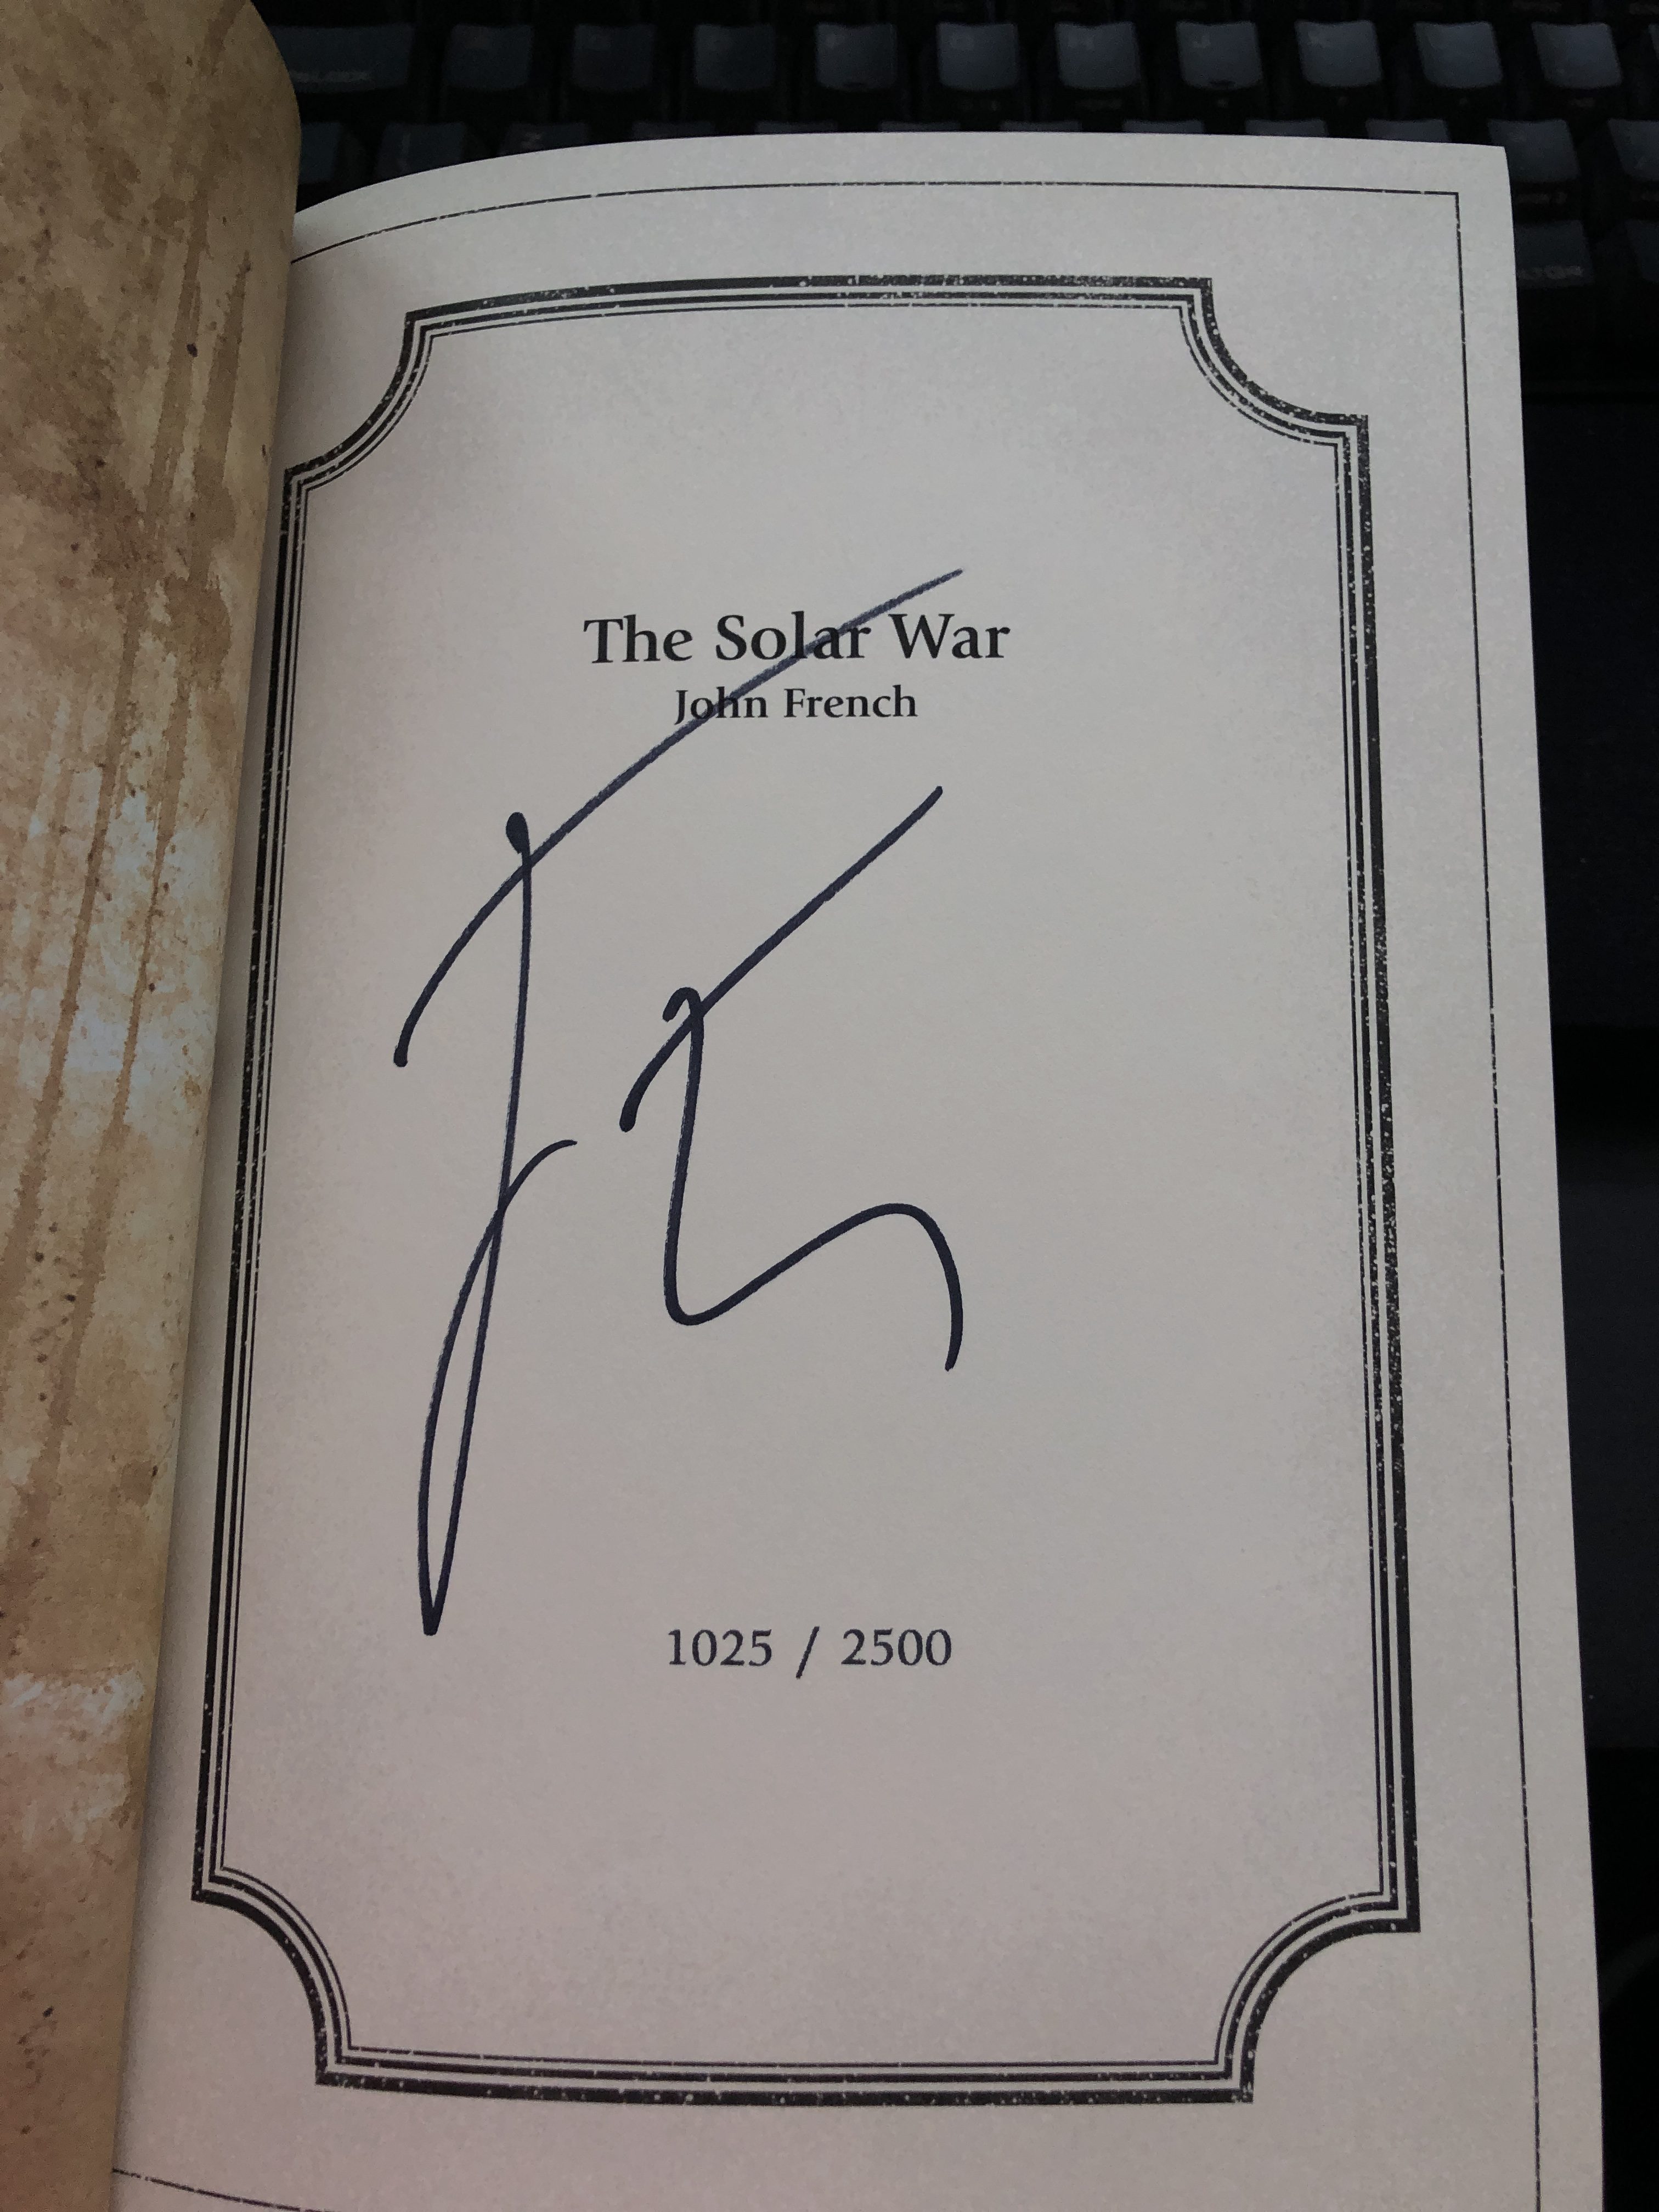 The Solar War limited editino numberinng and author's signature